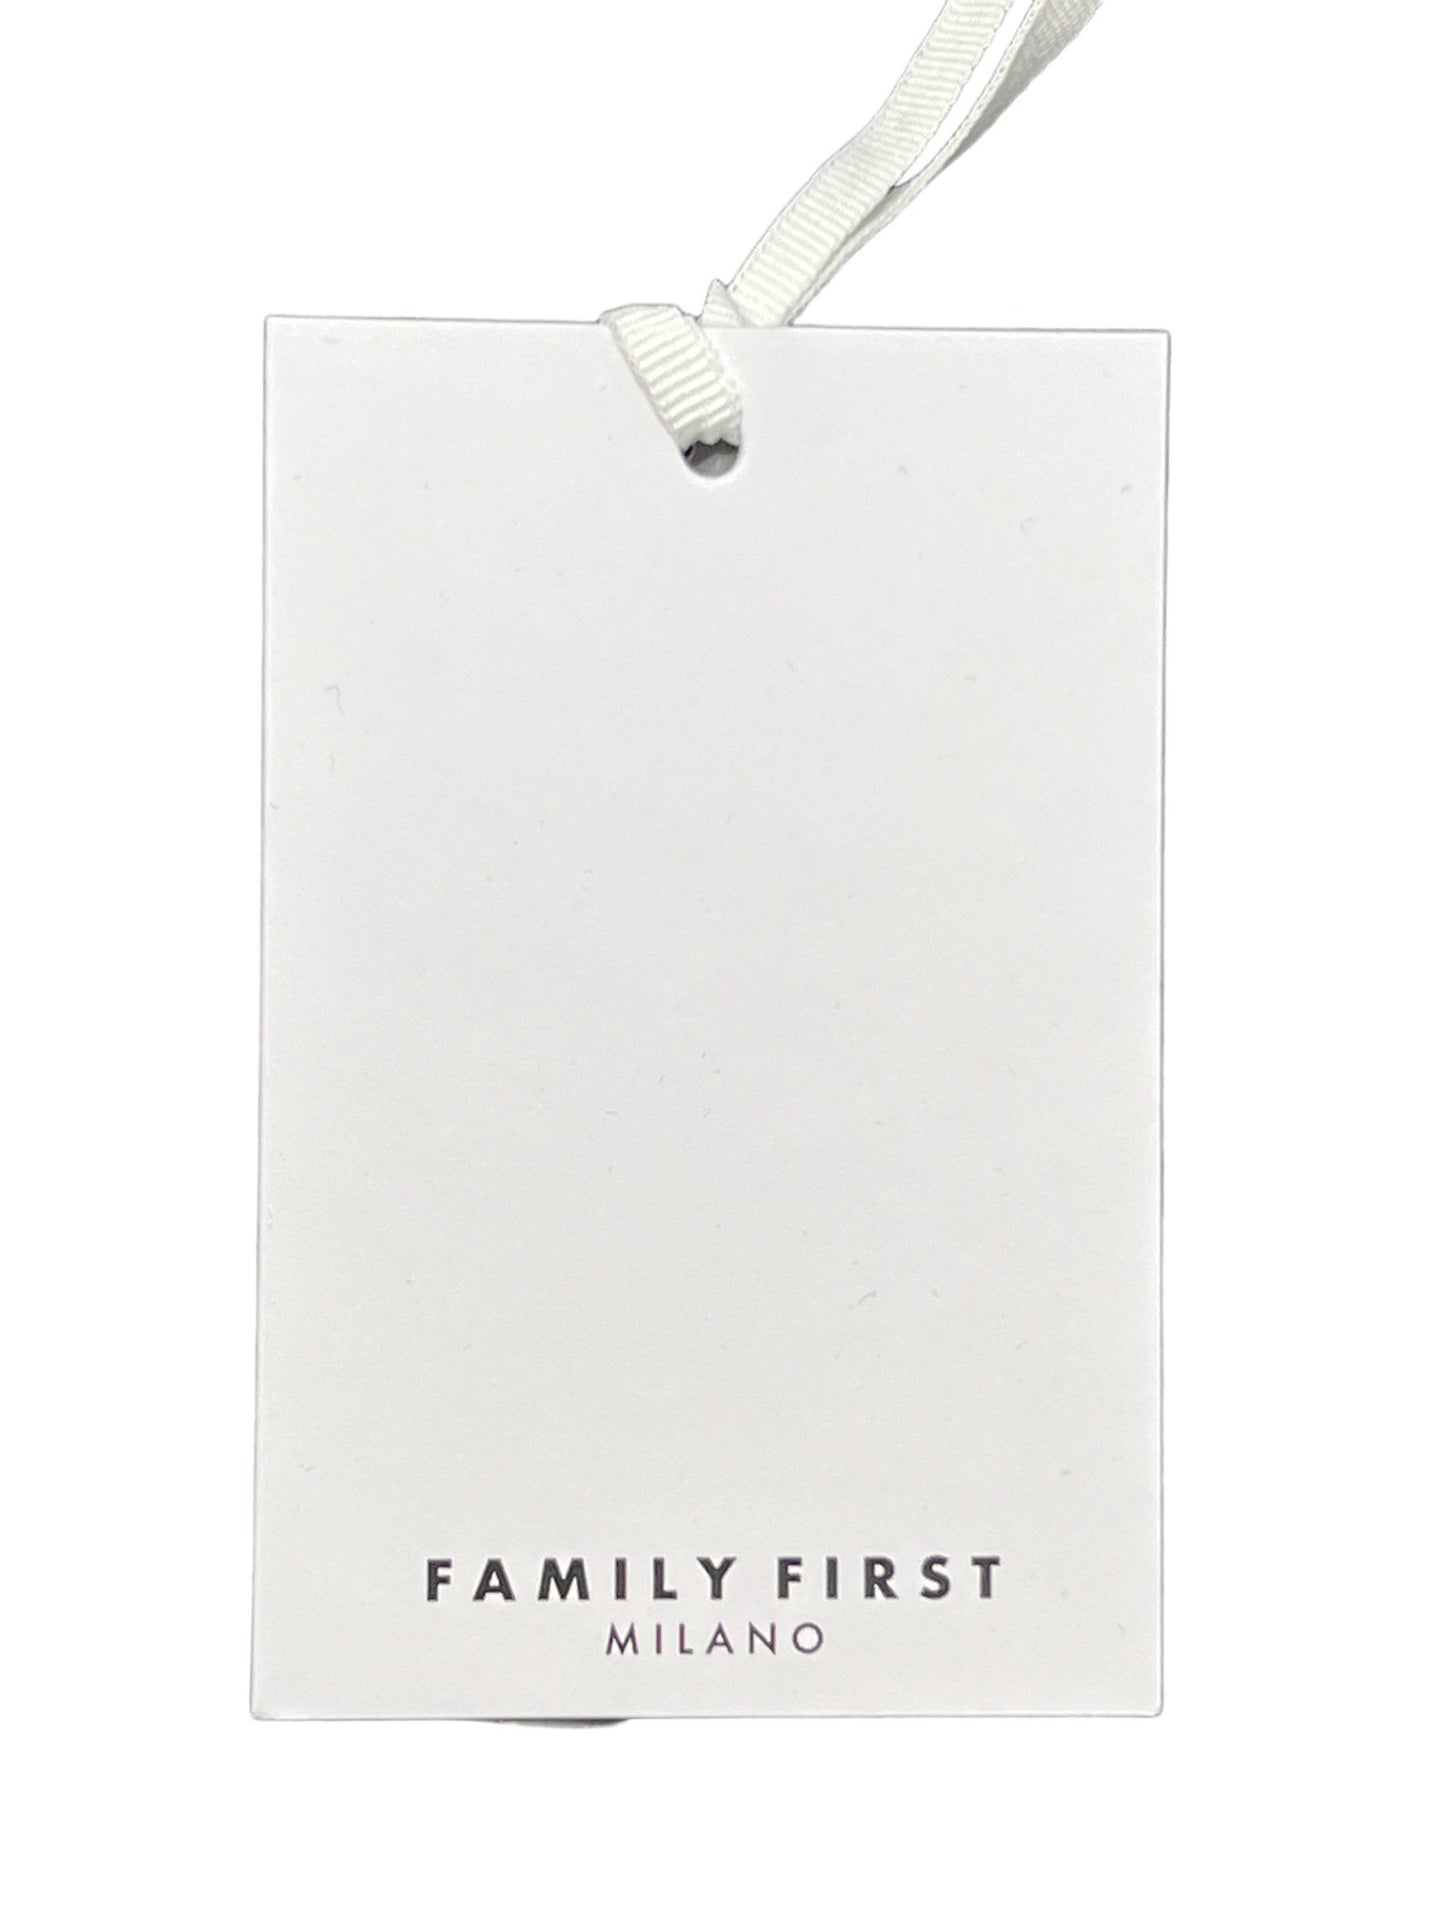 A white FAMILY FIRST TS2404 T-SHIRT CAVIAR WHT tag with "family first milano Made In Italy" printed at the bottom, attached by a white ribbon, isolated on a black background.